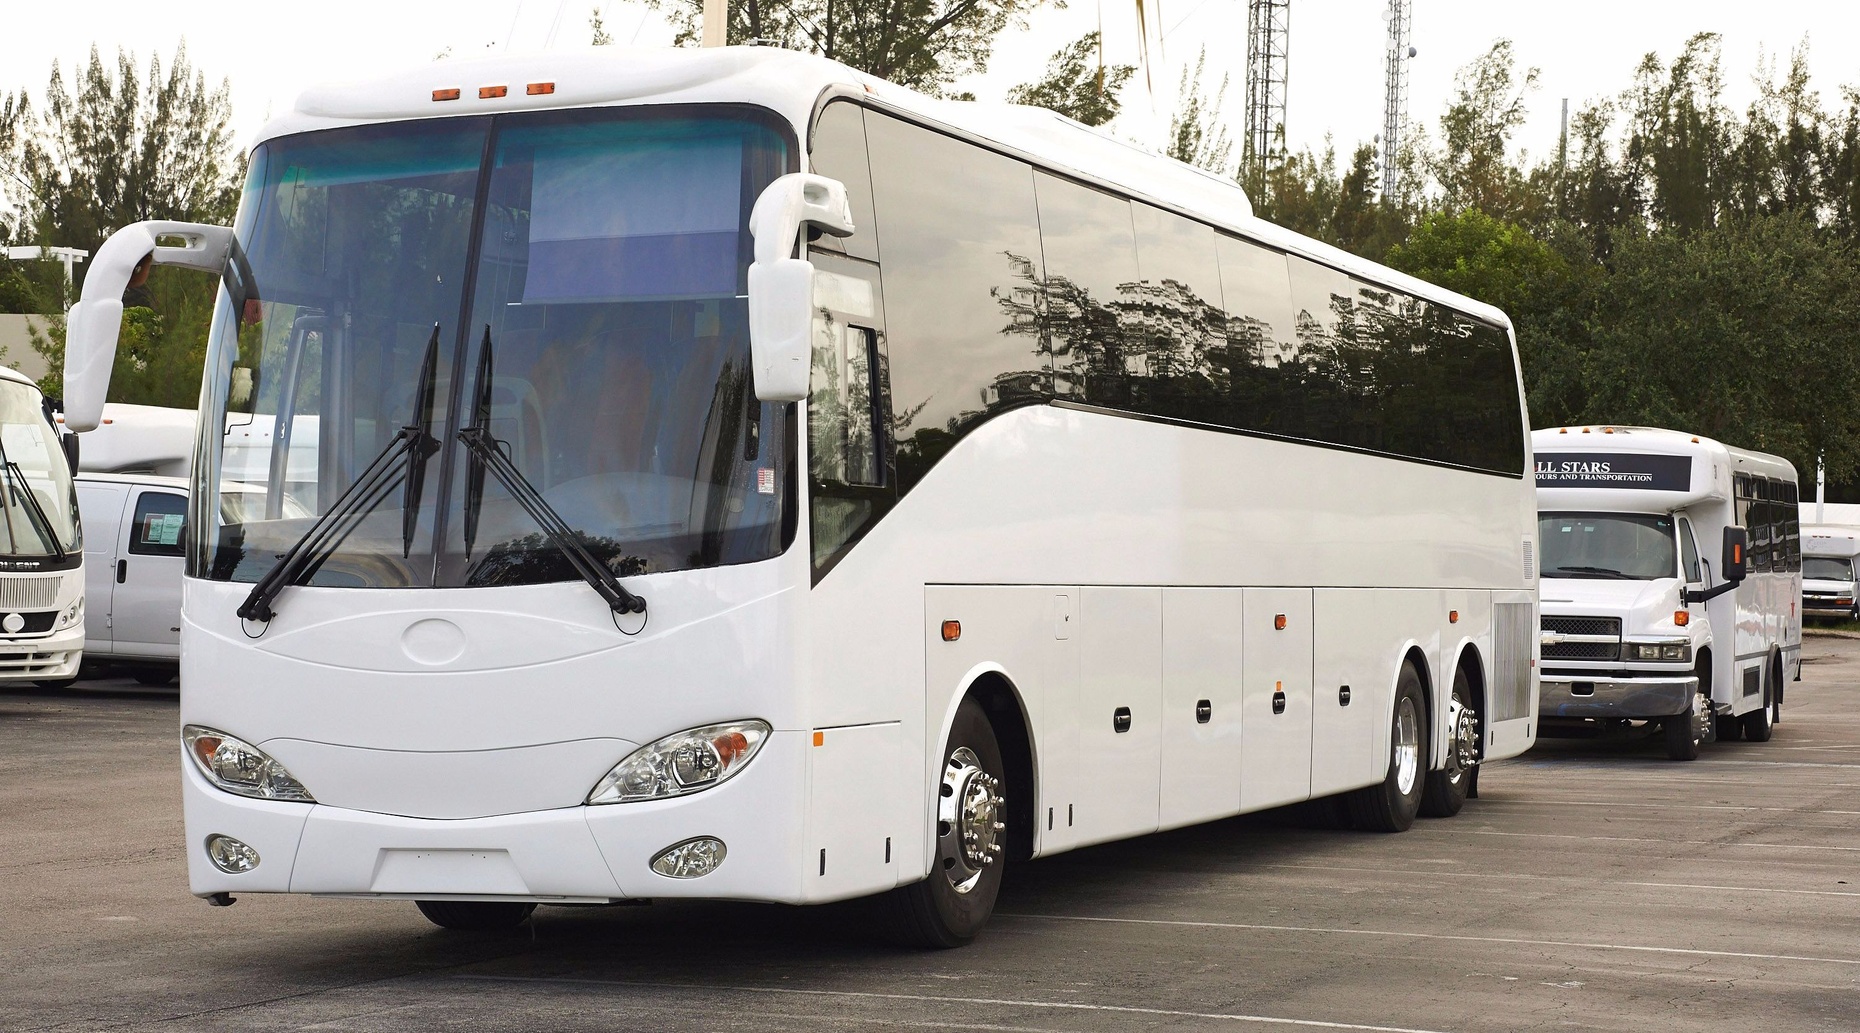 Shuttle from Port Everglades to Fort Lauderdale Airport